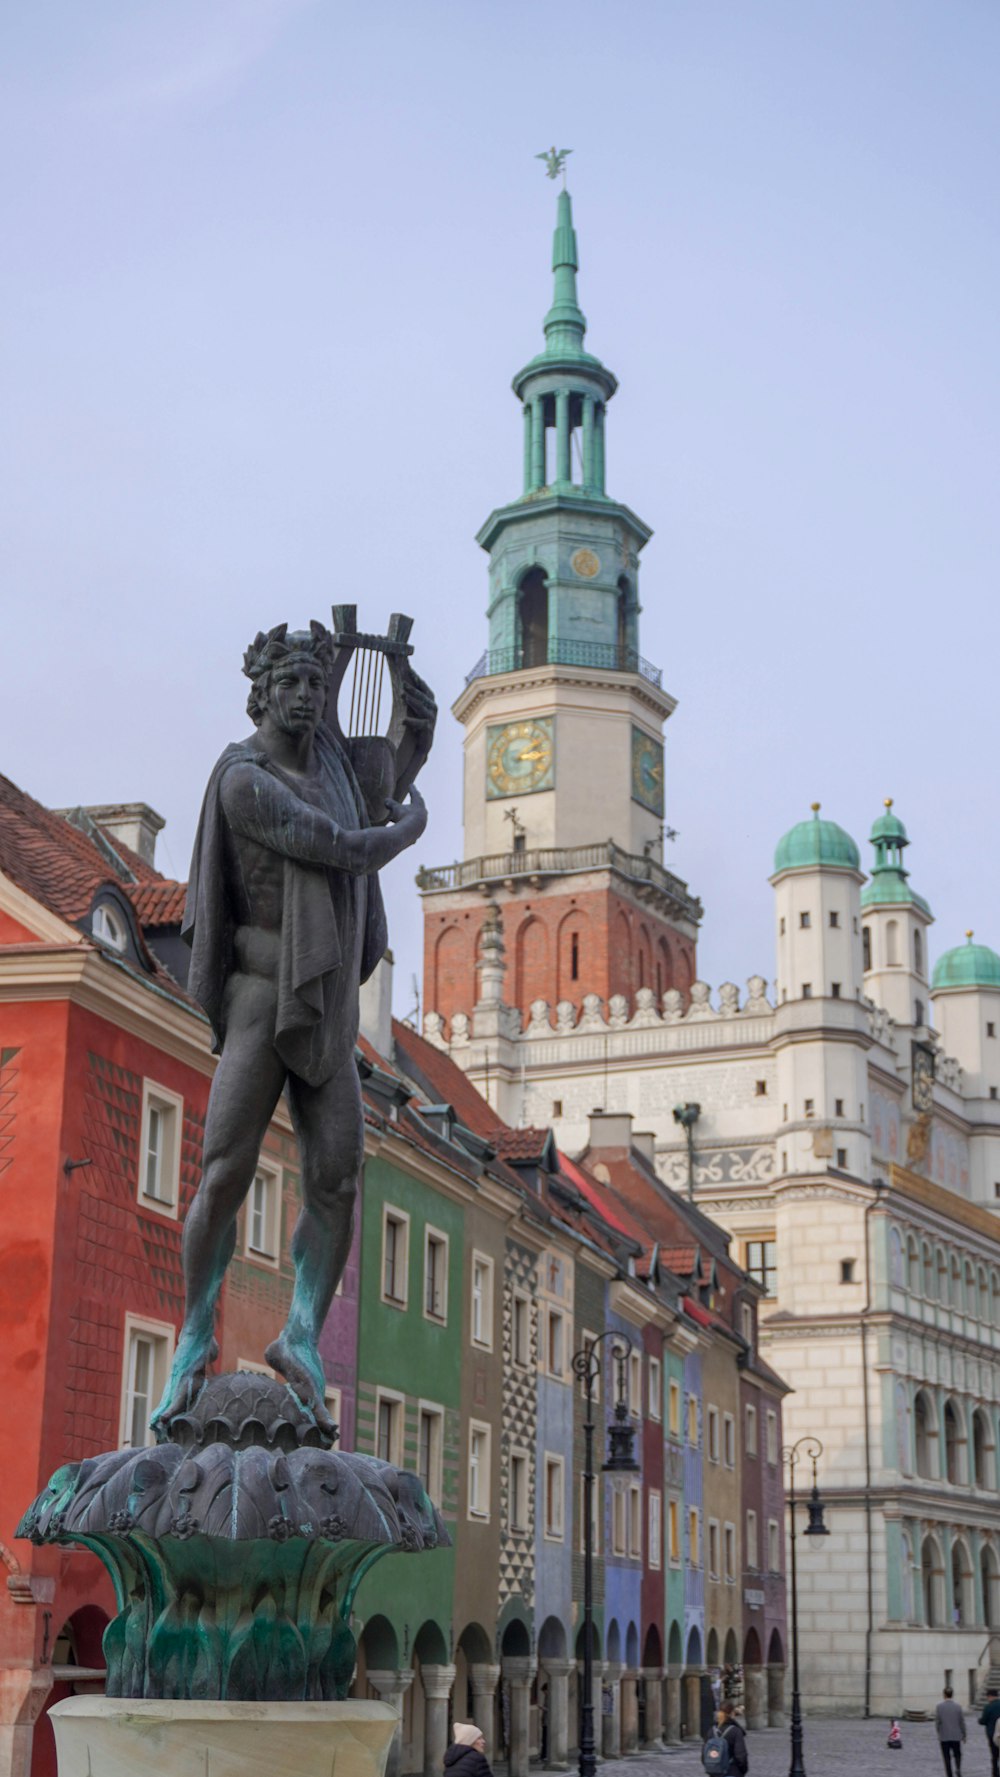 a statue of a man holding a harp in front of a building